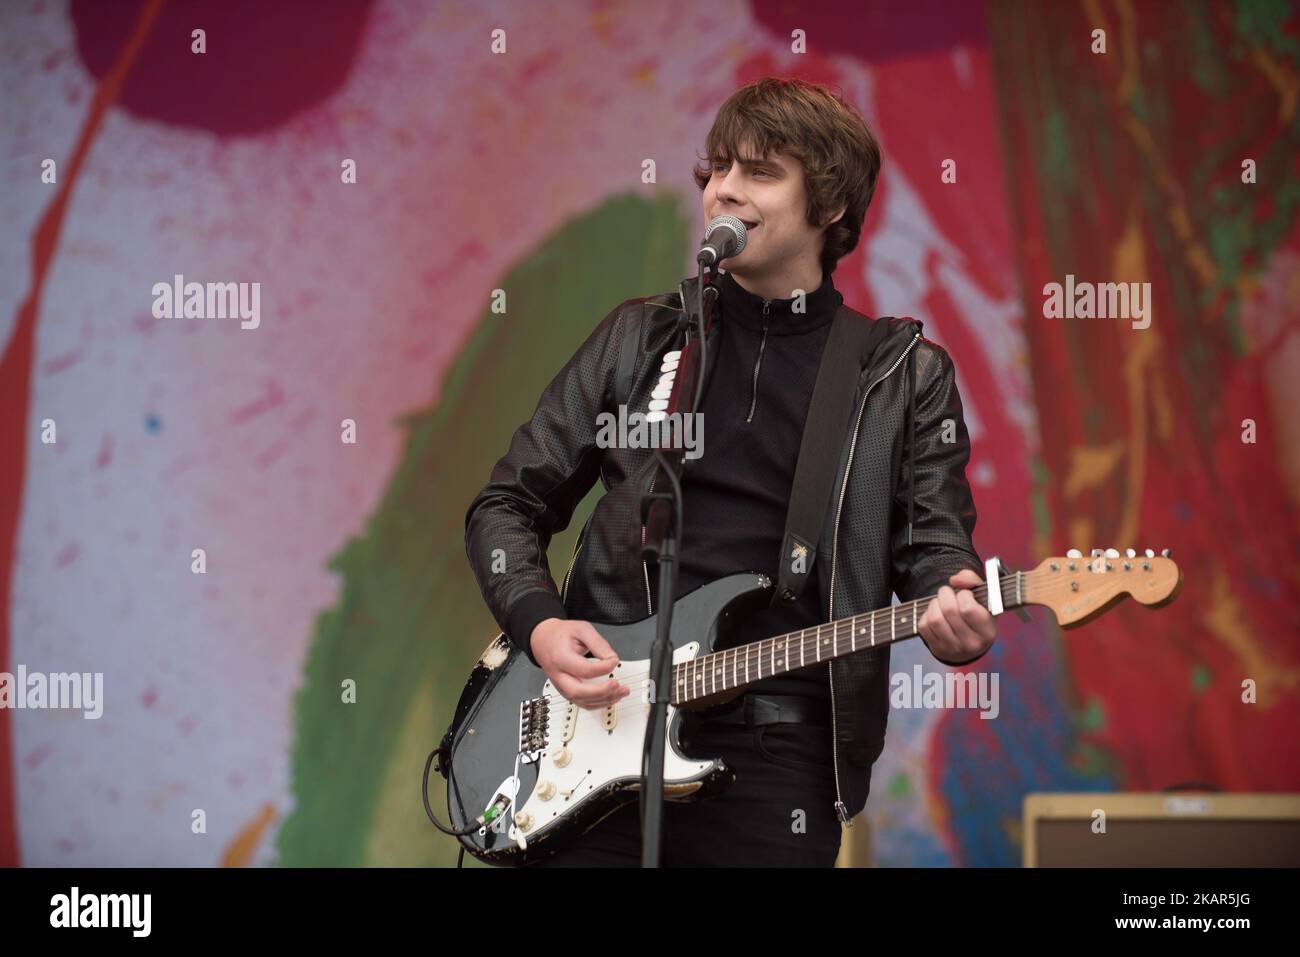 Enghish singer and songwriter Jake Bugg performs on stage at OnBlackheath Festival in London, on September 10, 2017. He released his fourth studio album titled Hearts That Strain, on 1st September 2017. (Photo by Alberto Pezzali/NurPhoto) Stock Photo